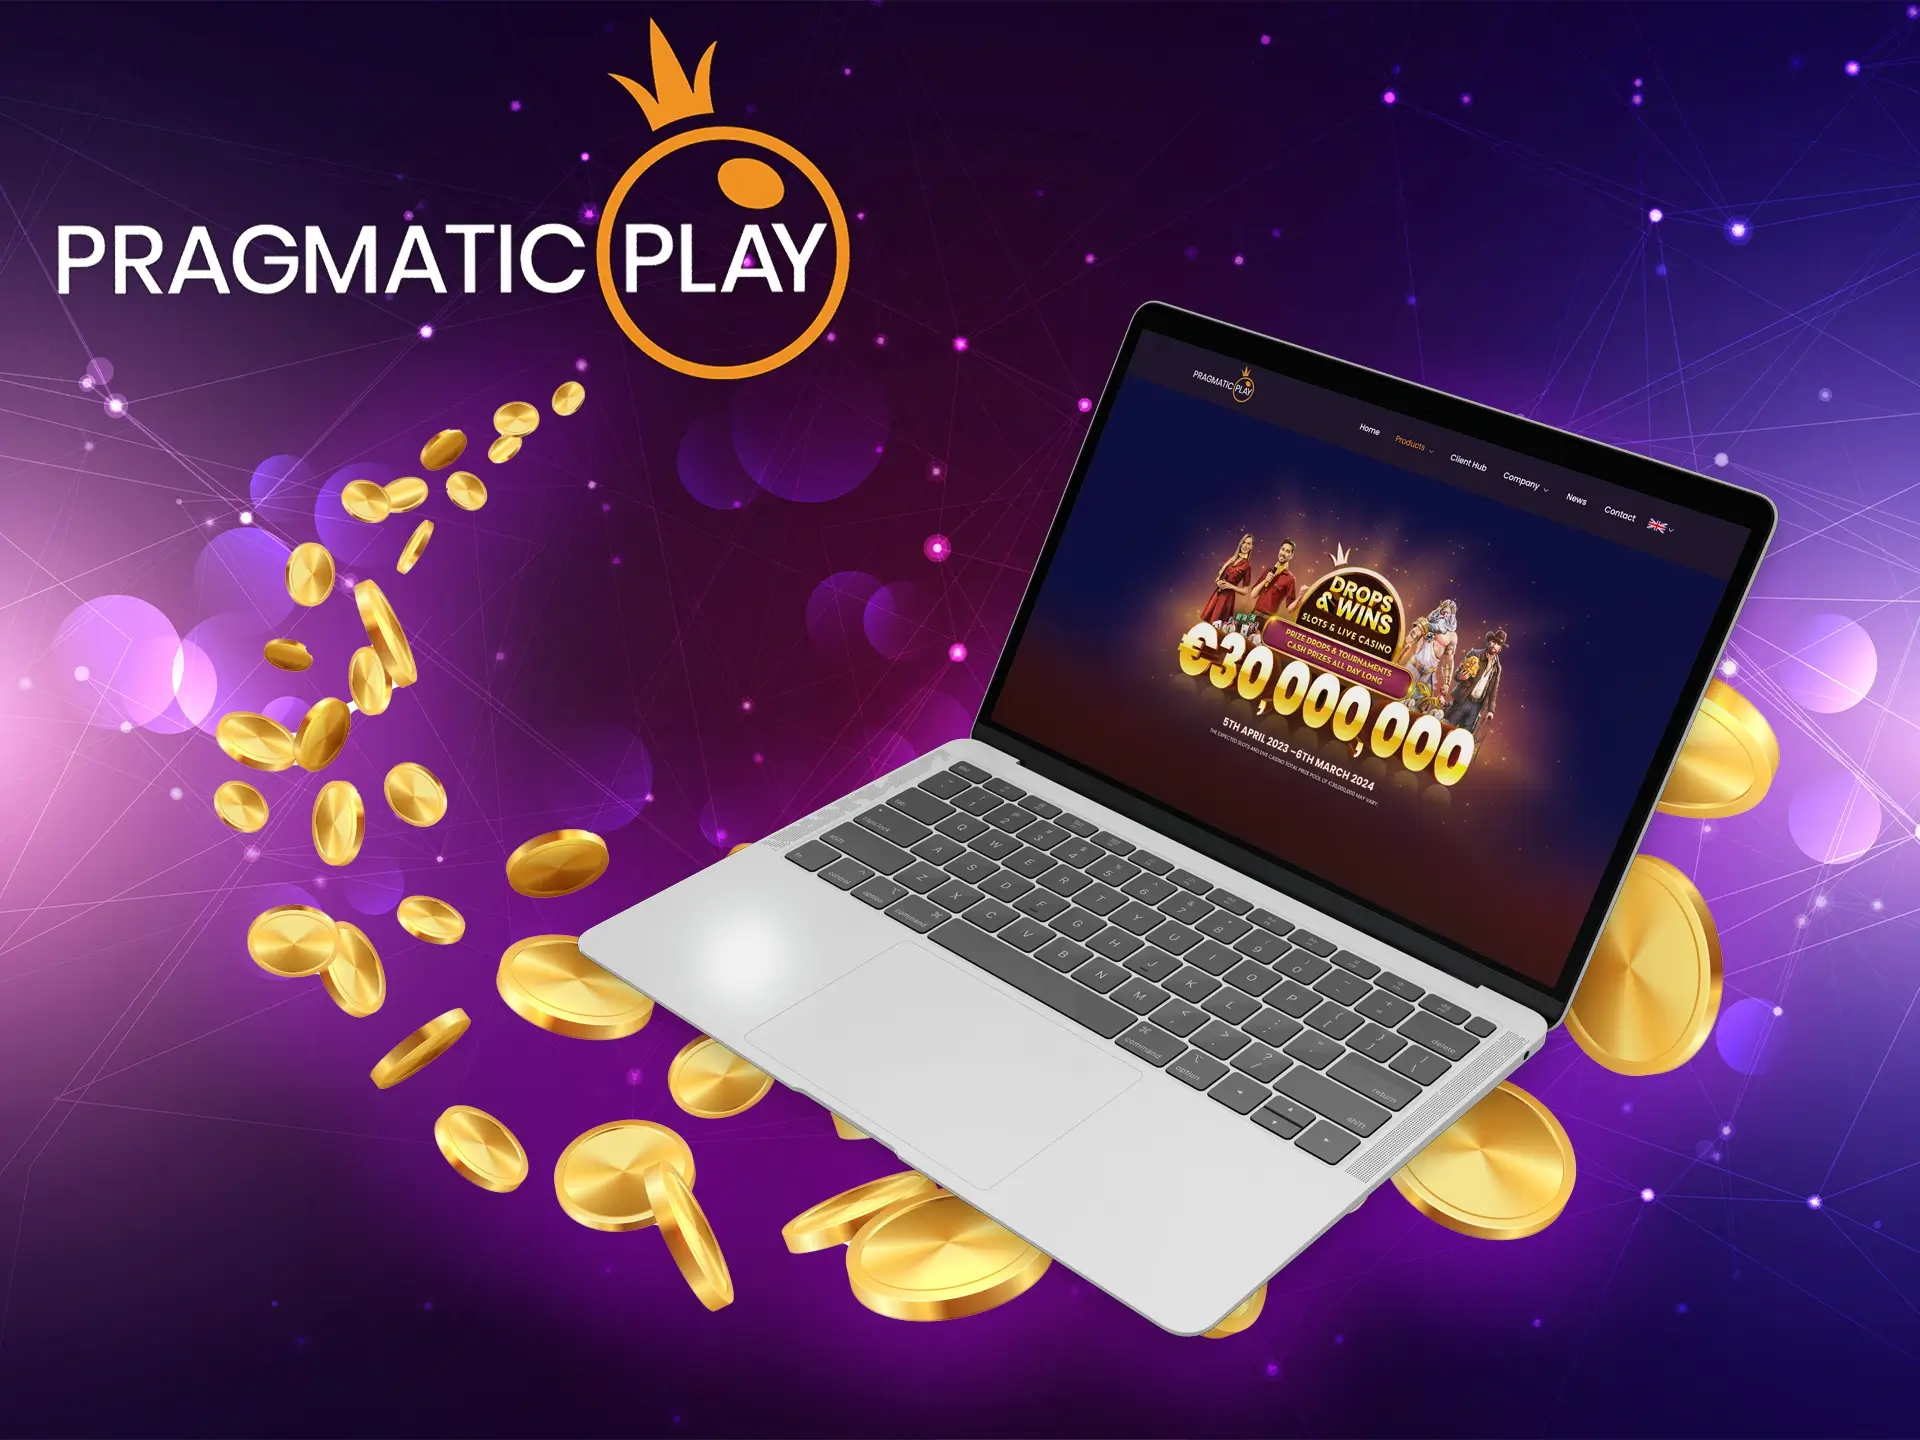 Participate in tournaments and win prizes.